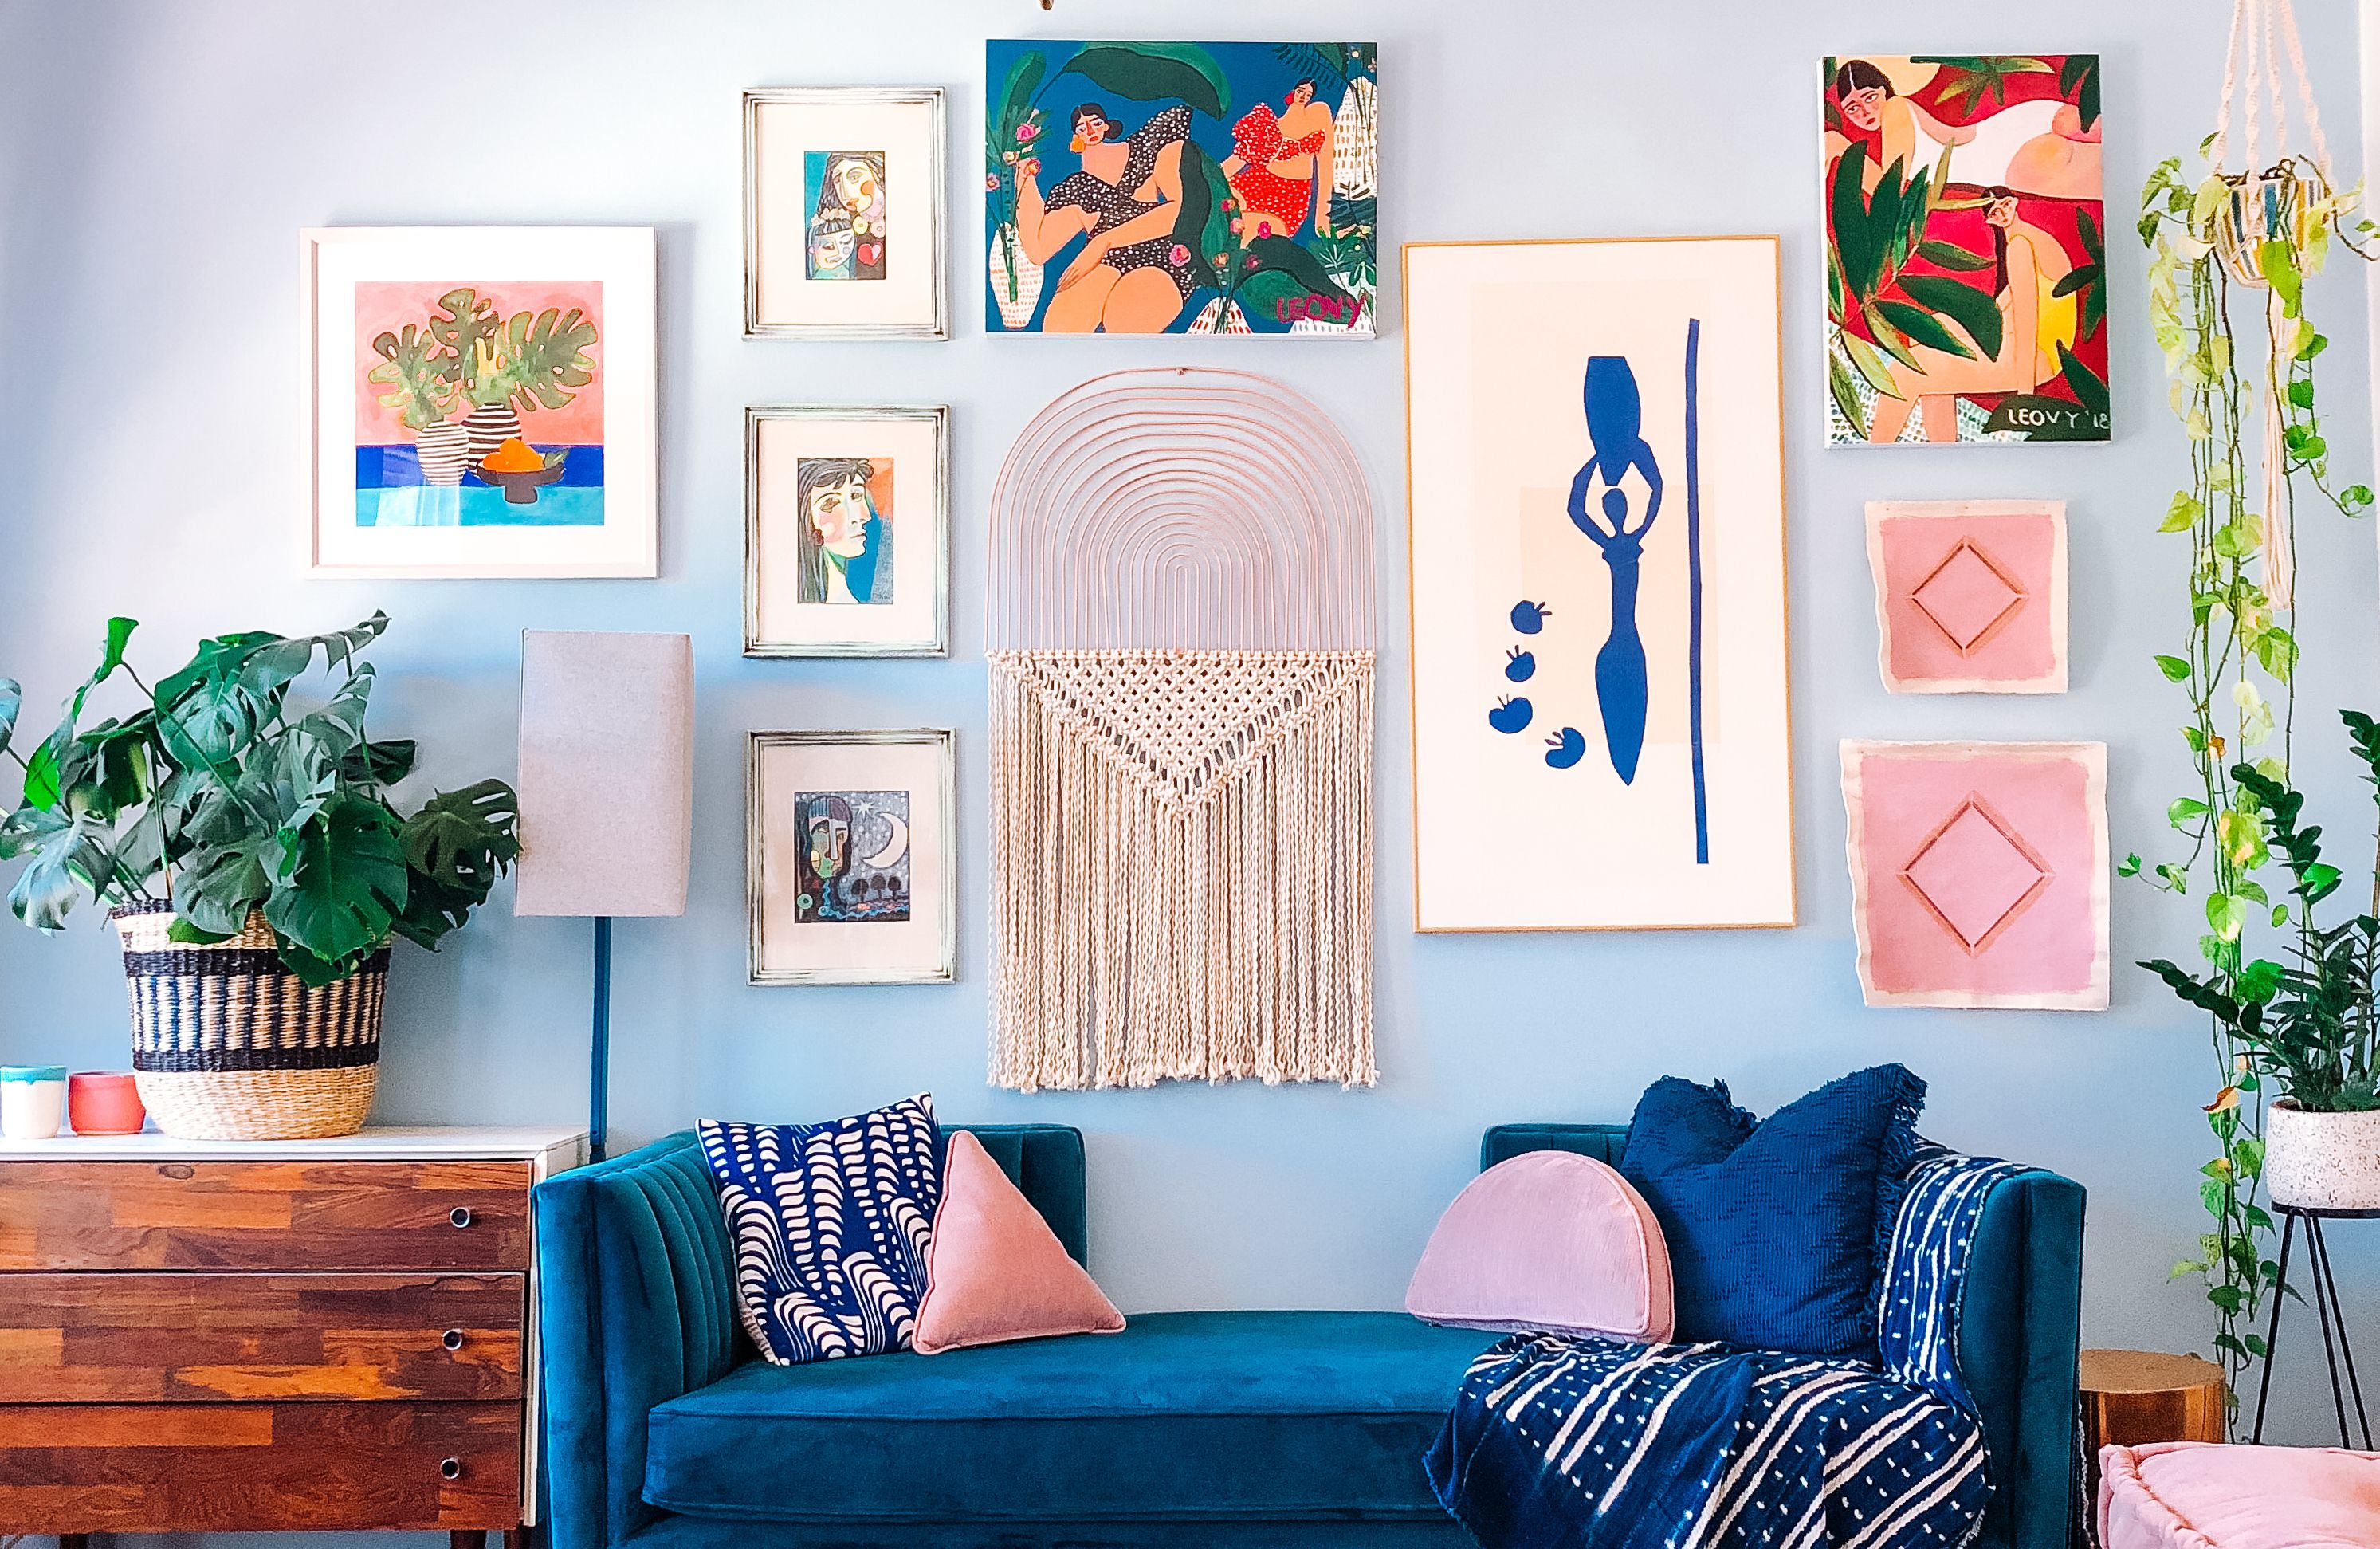 The Maximalist Gallery Trend Is Totally Doable